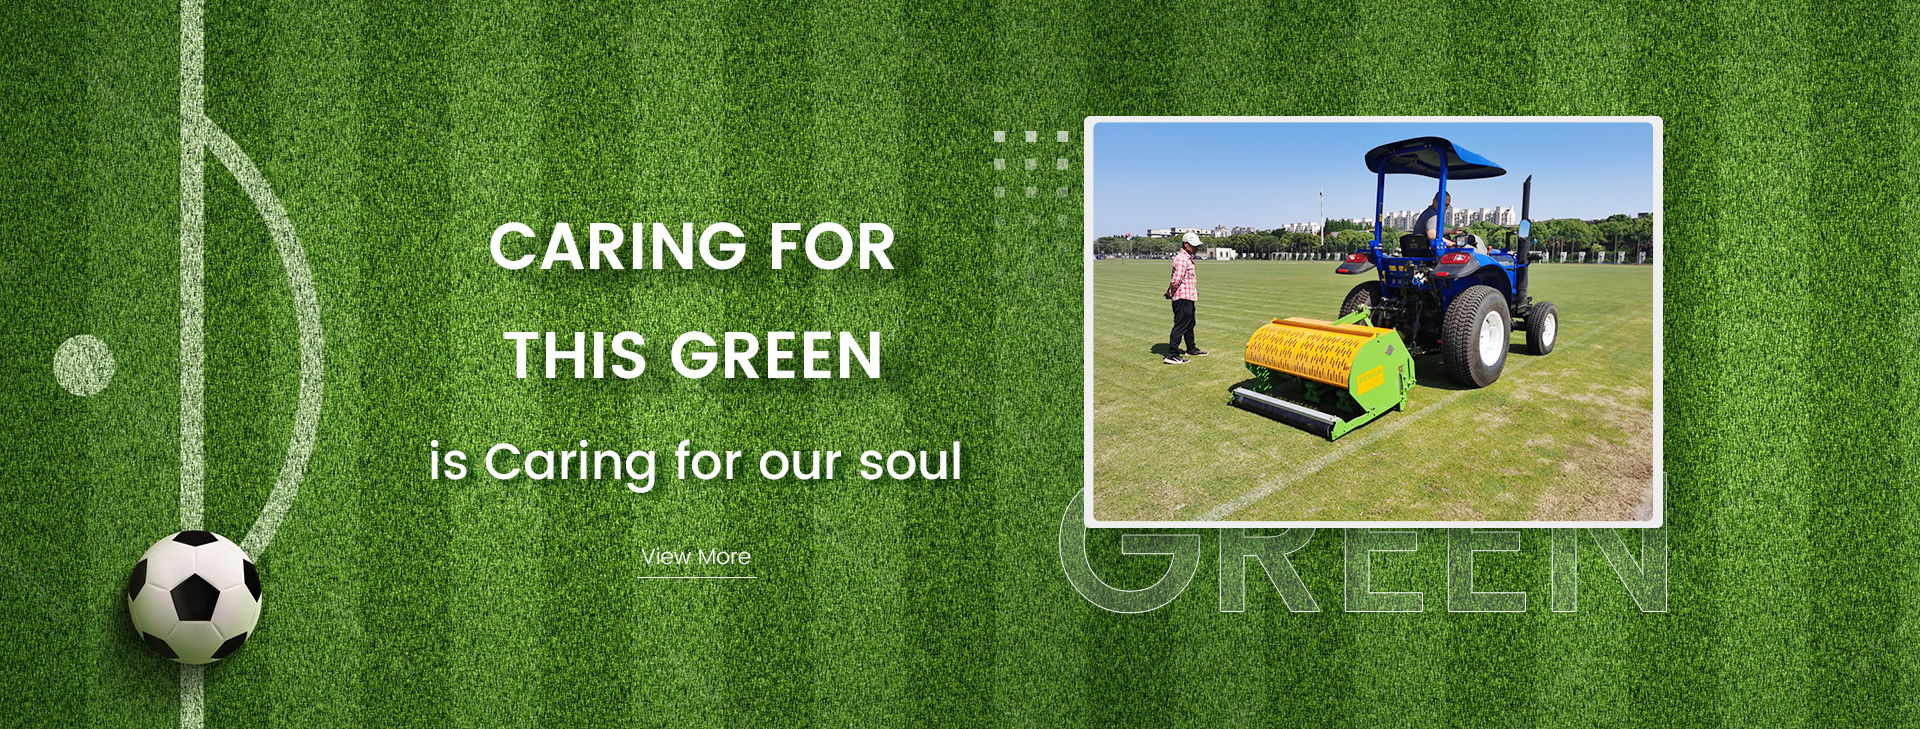 CARING FOR THIS GREEN is Caringfor our soul